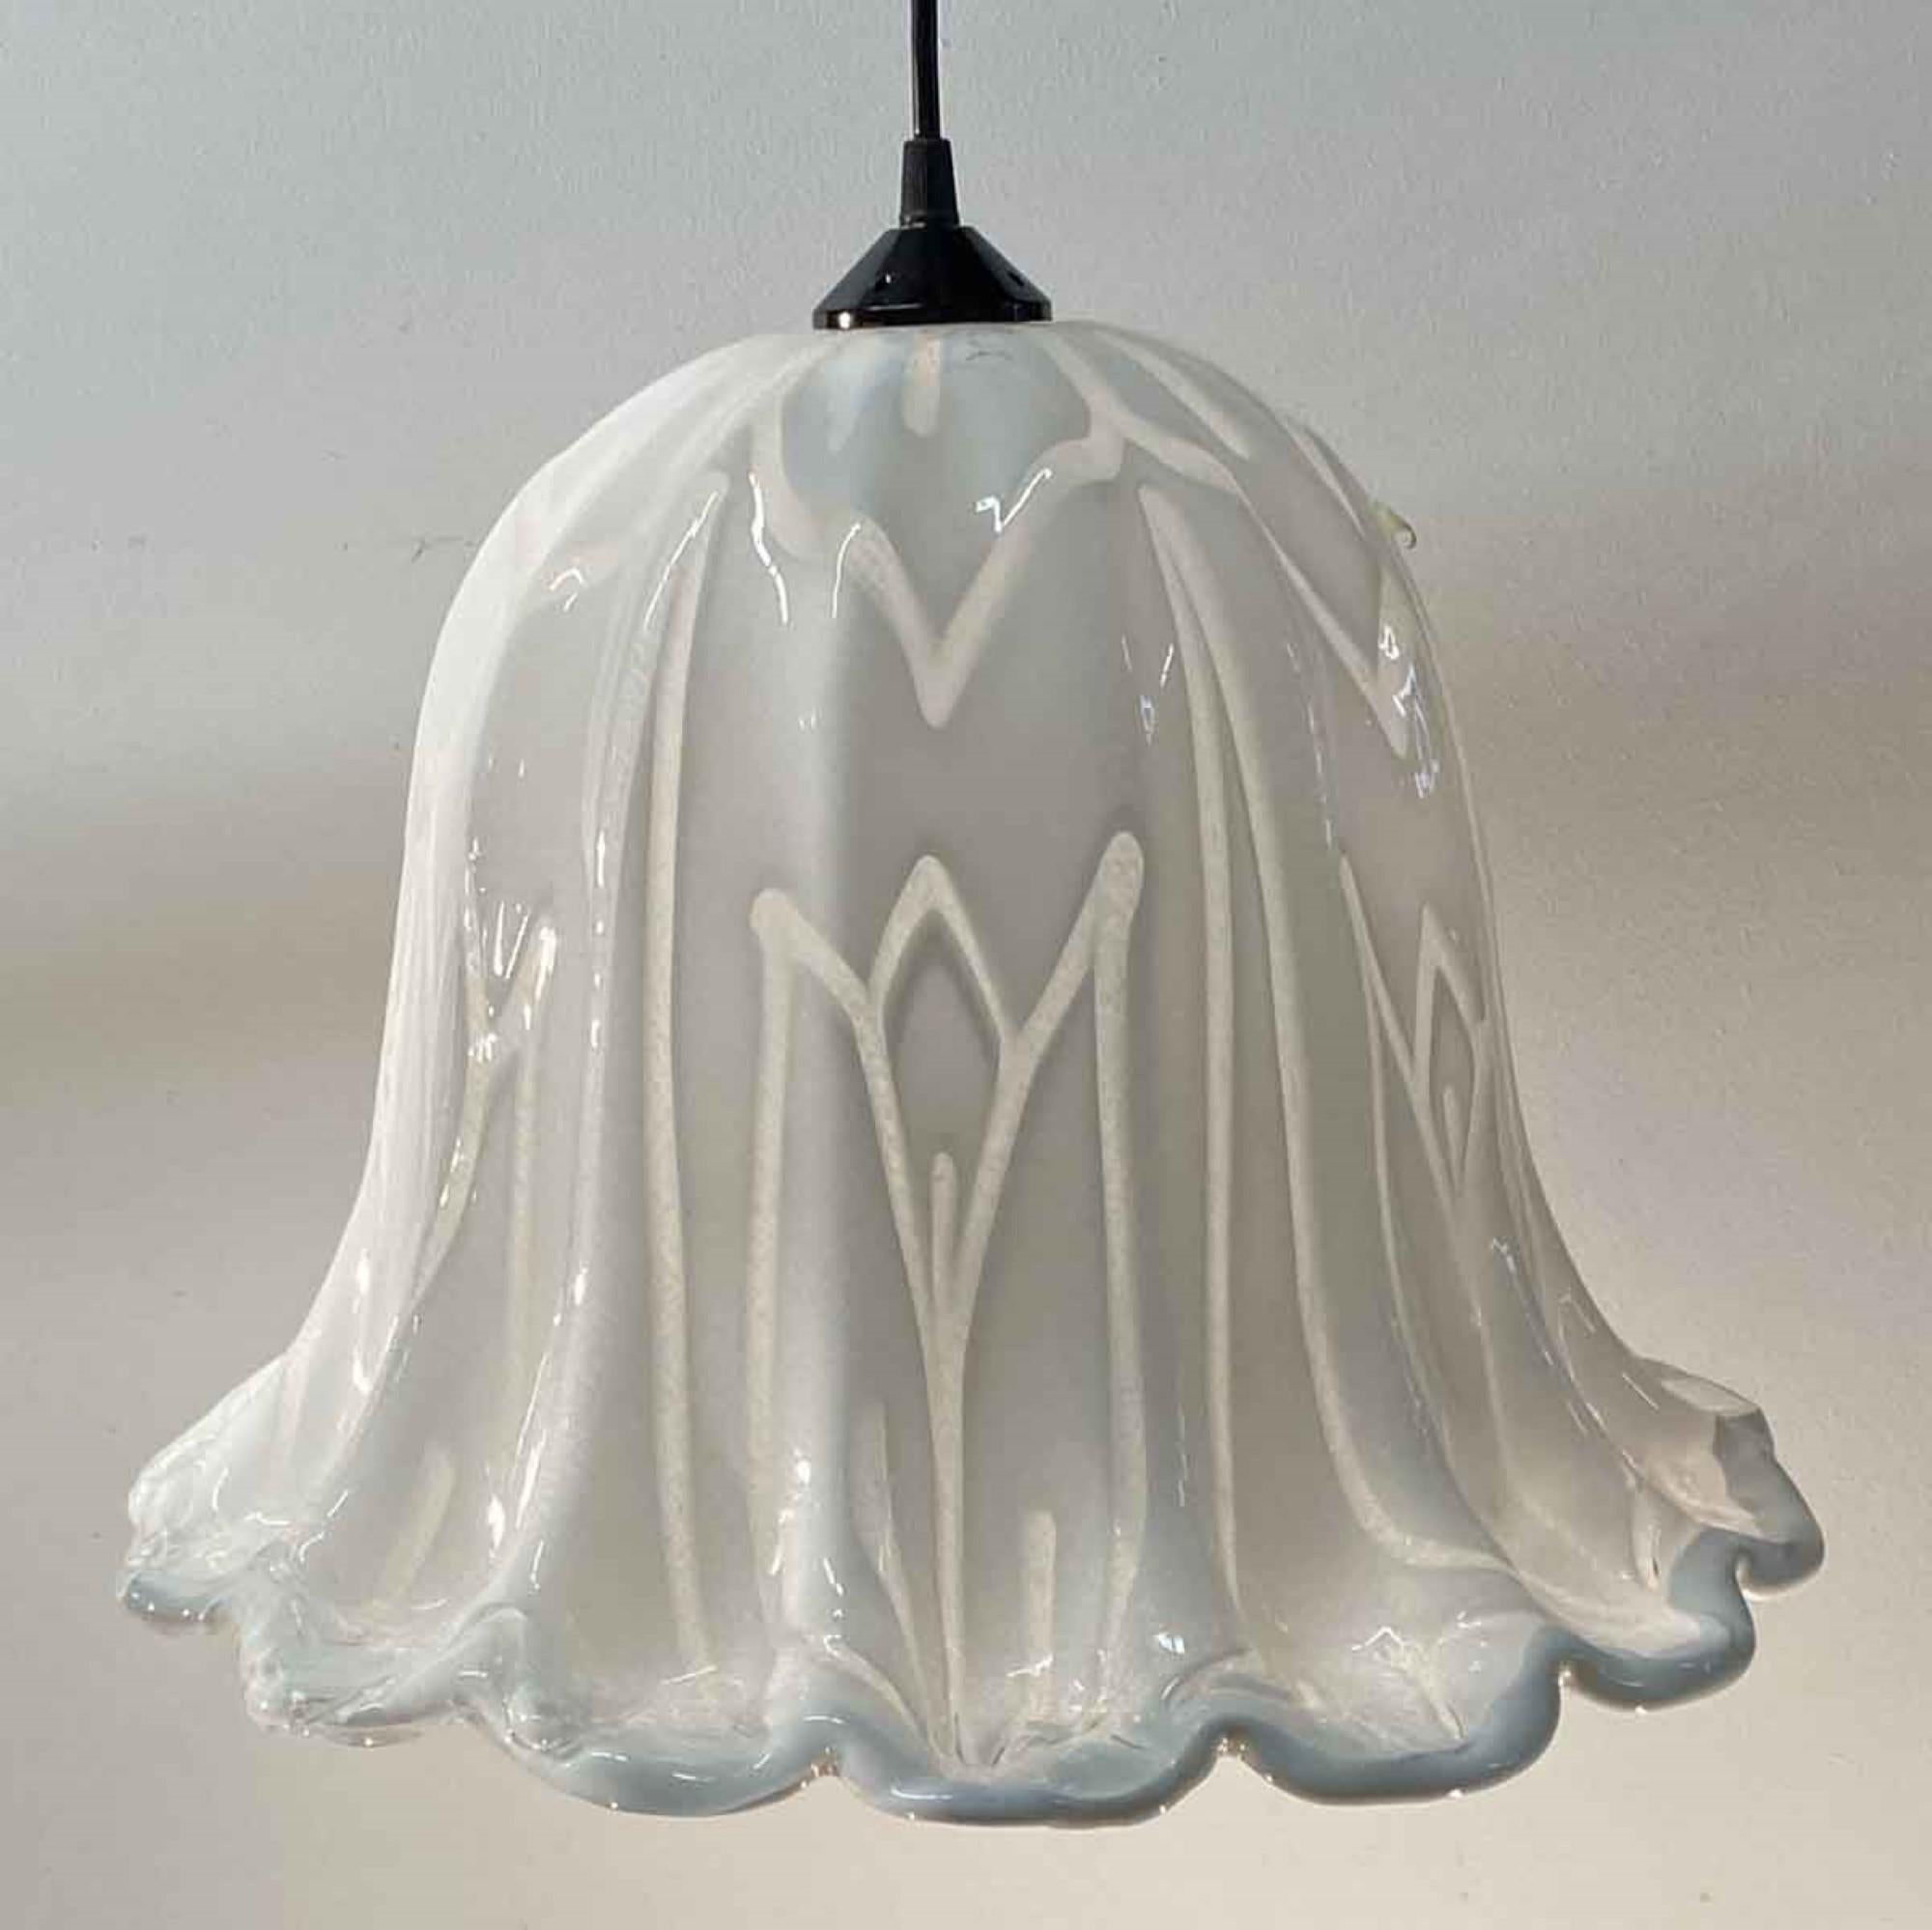 1980s hand made white Mid-Century Modern Murano glass pendant light done in a tulip style. The fitter can be done in a white cord, black cord, antique brass pole, or a polished nickel pole. Please specify. Measures: 16 In. diameter. This can be seen